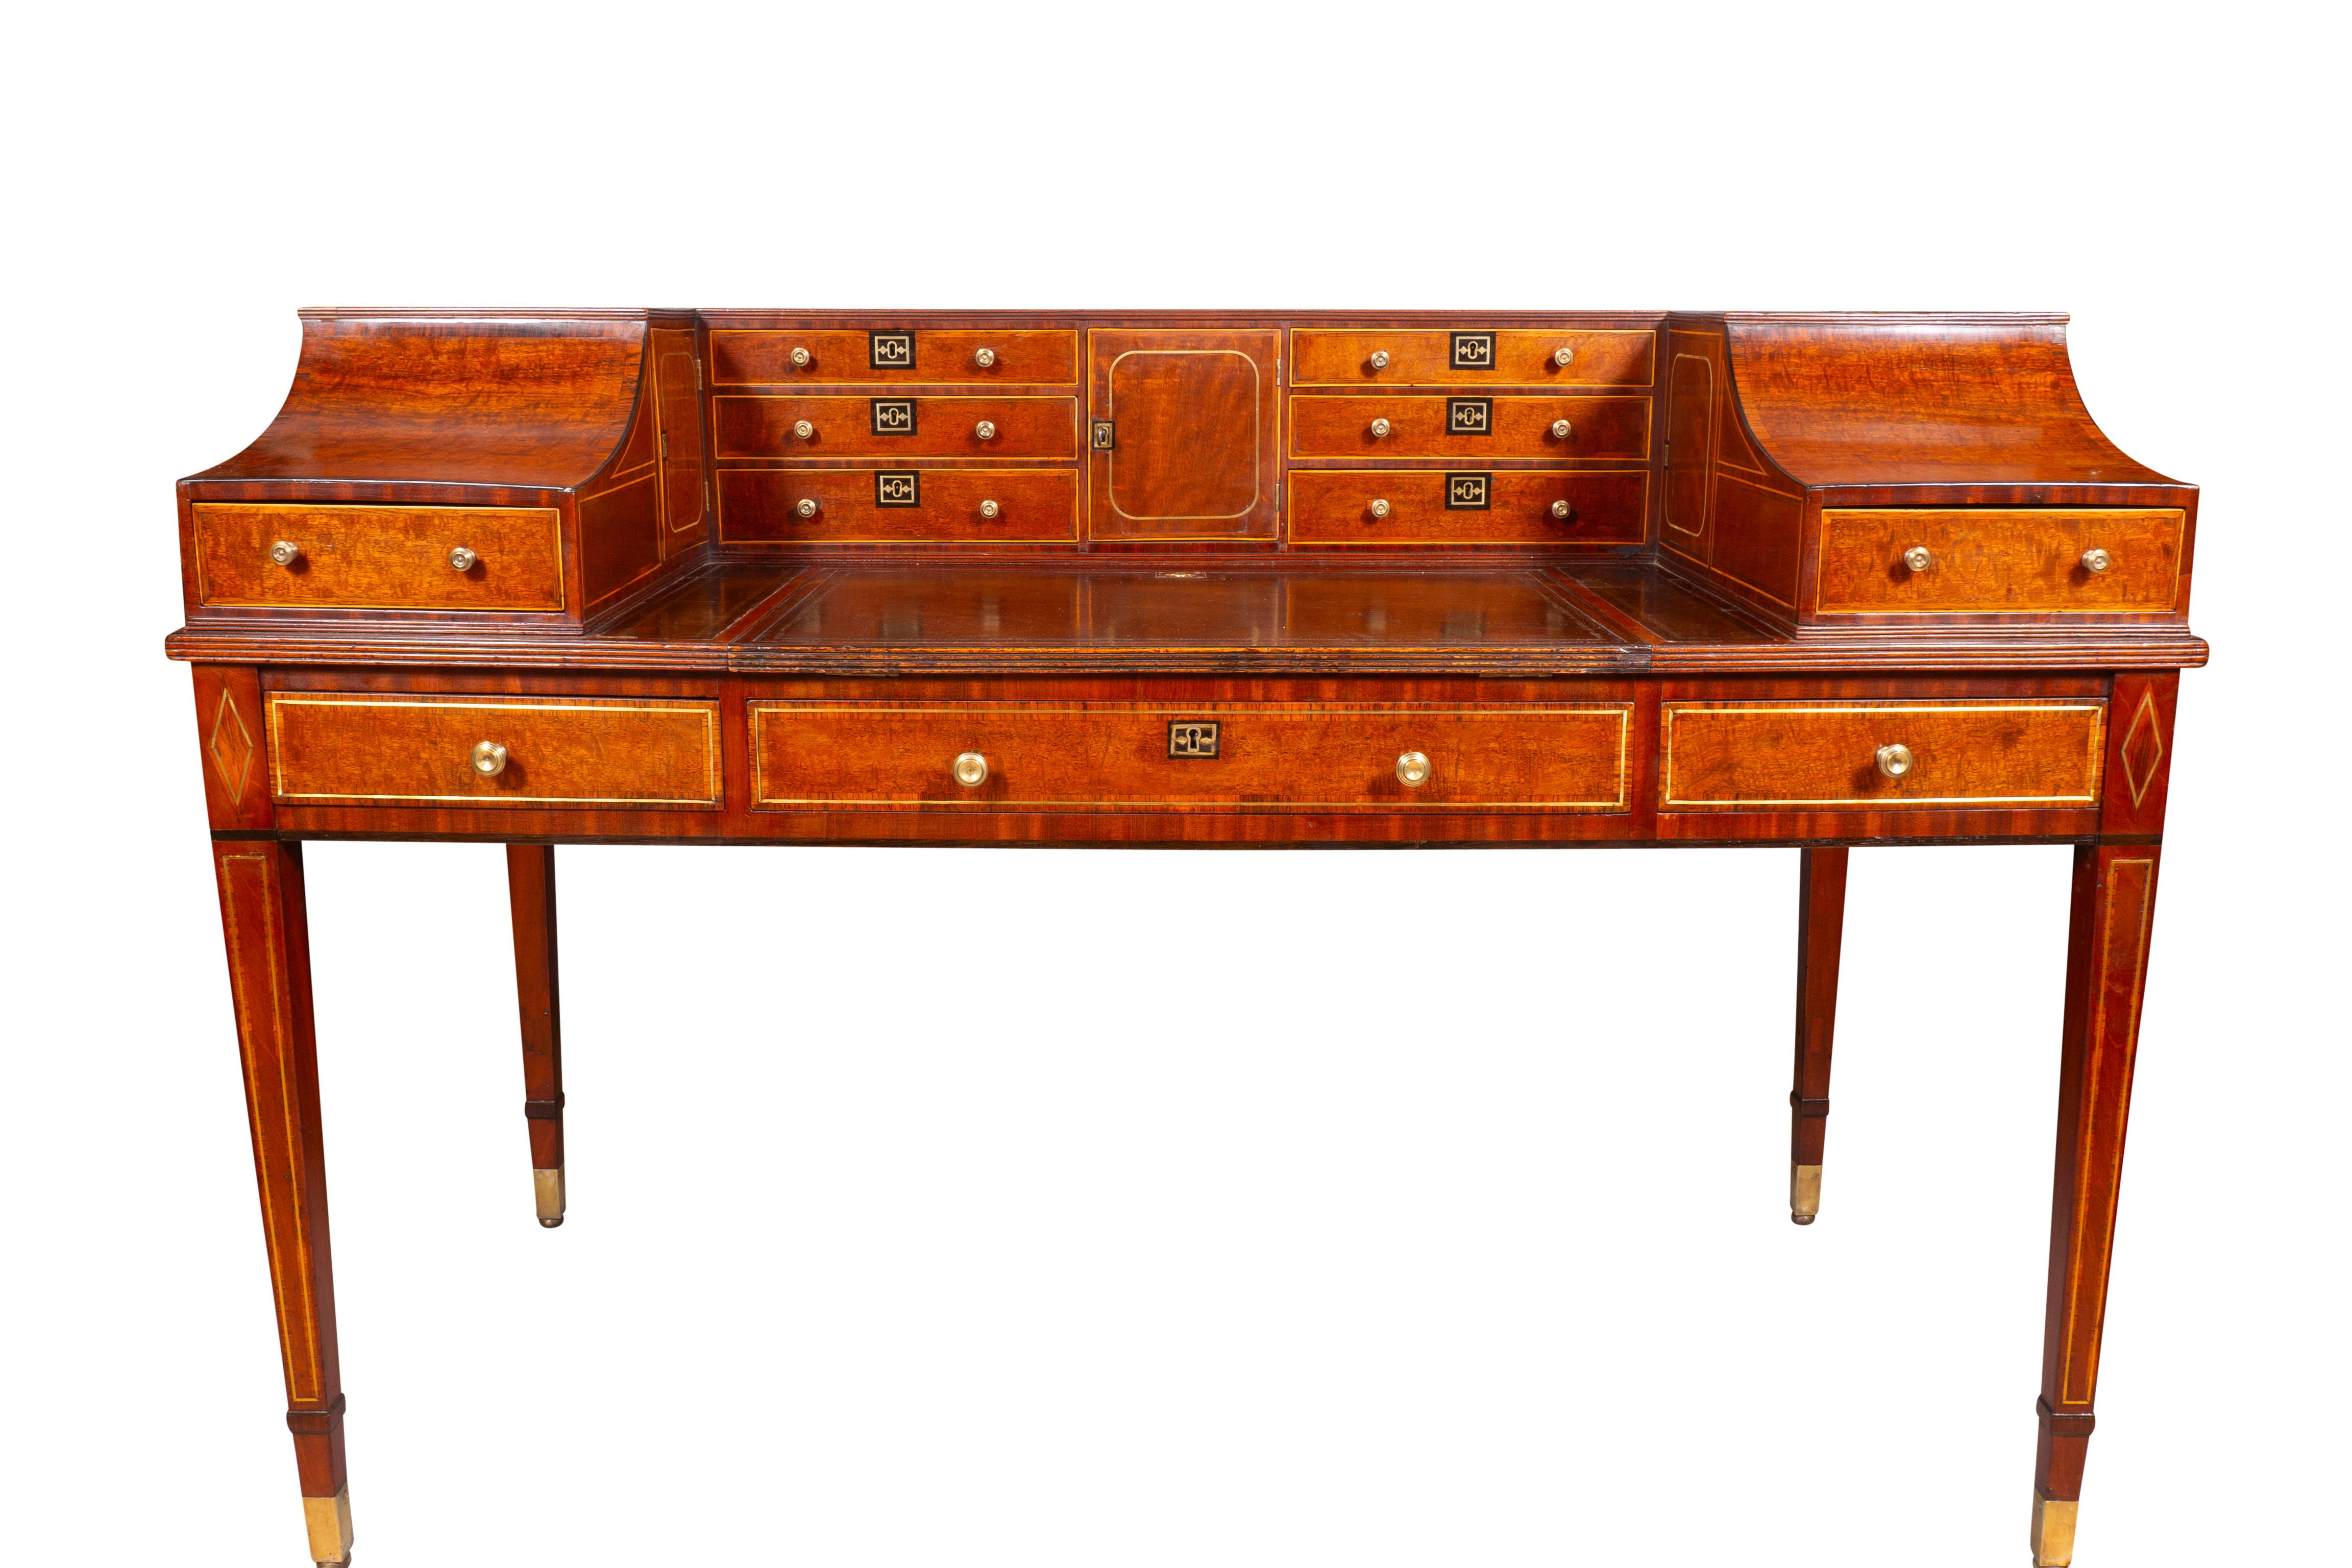 English George III Style Mahogany And Brass Inlaid Carleton House Desk For Sale